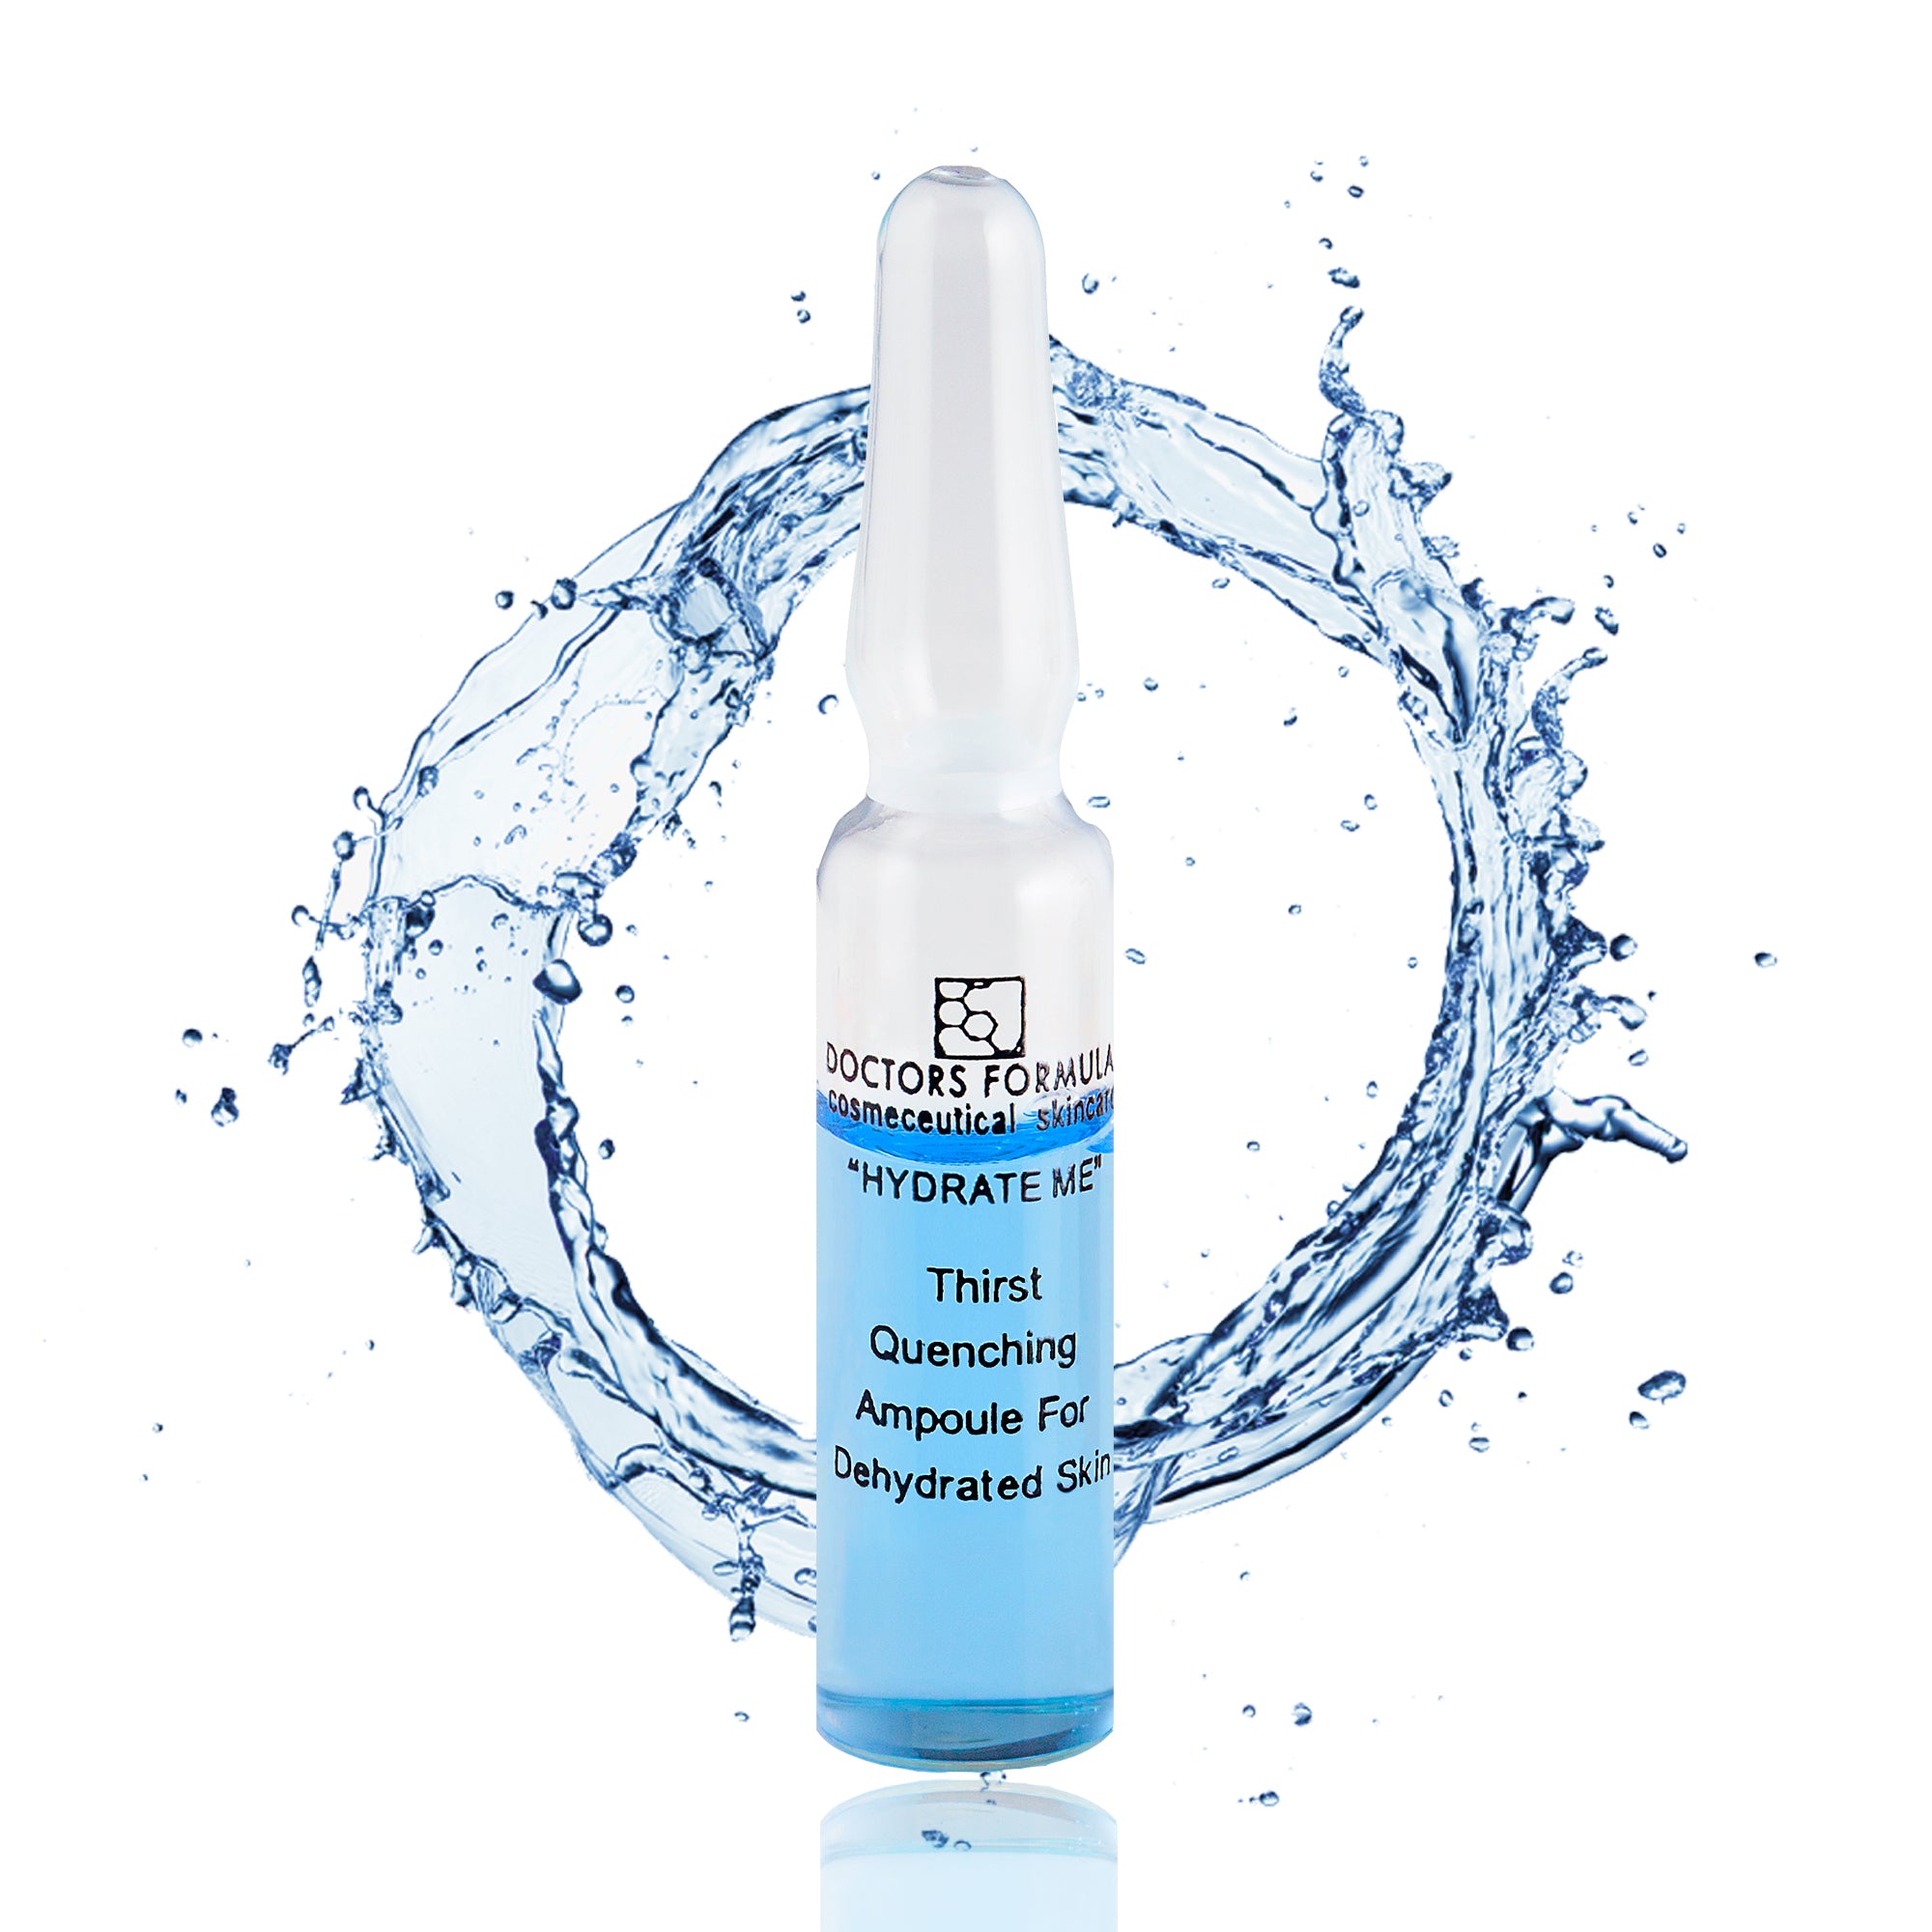 Ampoule Hydrate Me 7 x 2ml